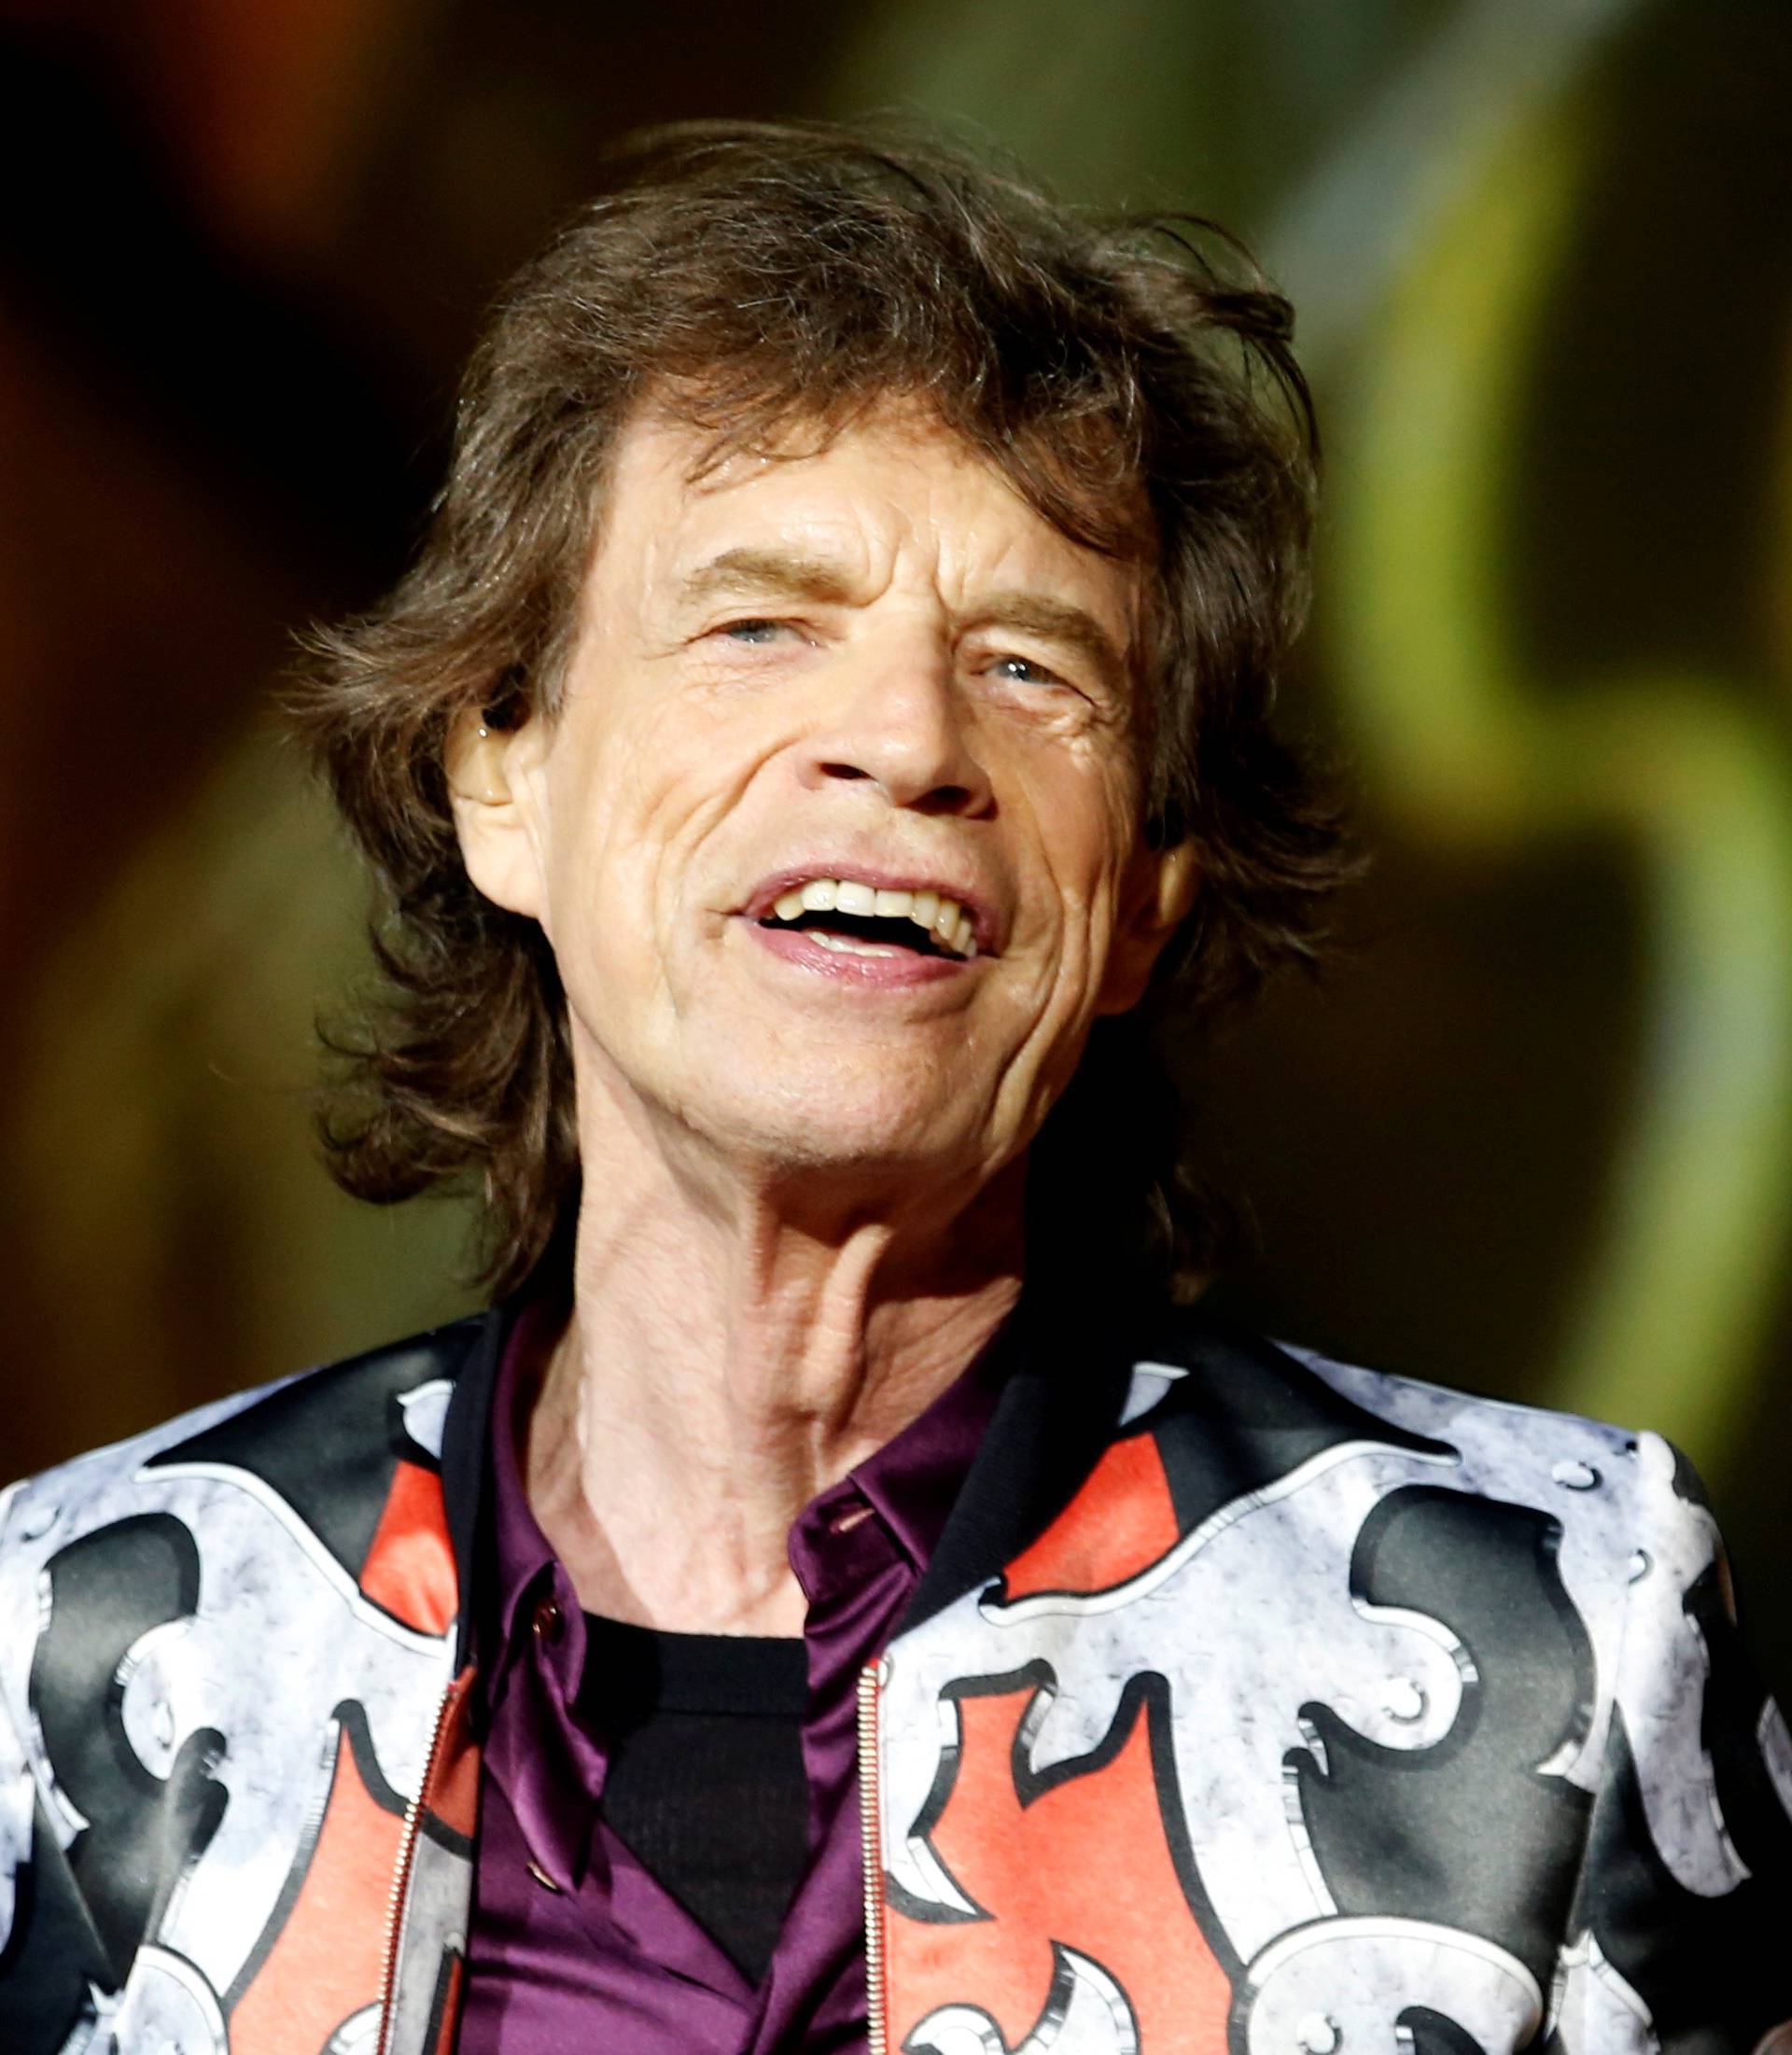 FILE PHOTO: Mick Jagger of the Rolling Stones performs during a concert of their "No Filter" European tour at the Orange Velodrome stadium in Marseille